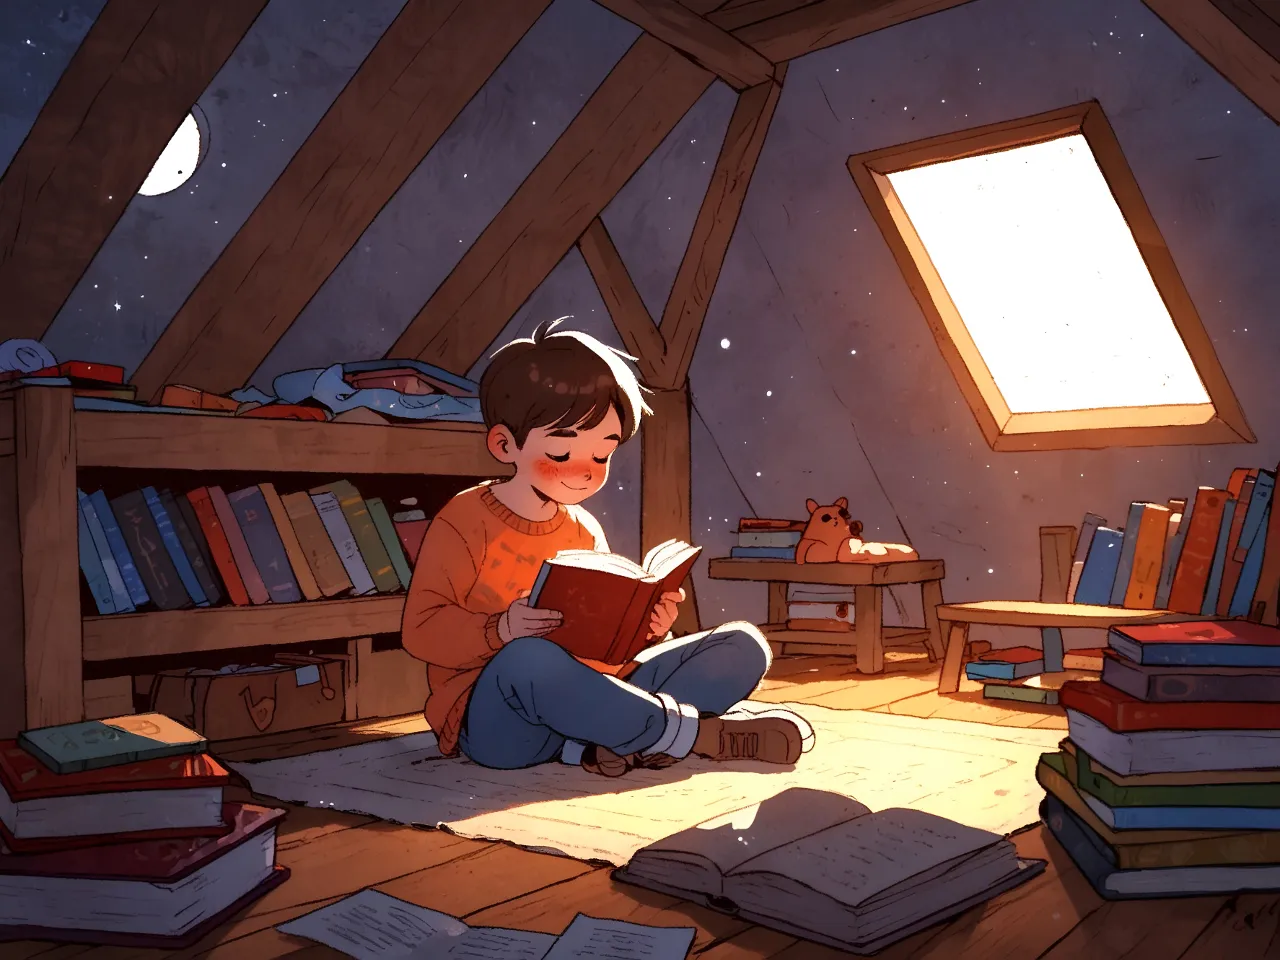 Young boy sitting alone on the floor of a cozy attic, absorbed in reading a magical book. Don't mess up book, limbs, fingers, keep things anatomically correct. 